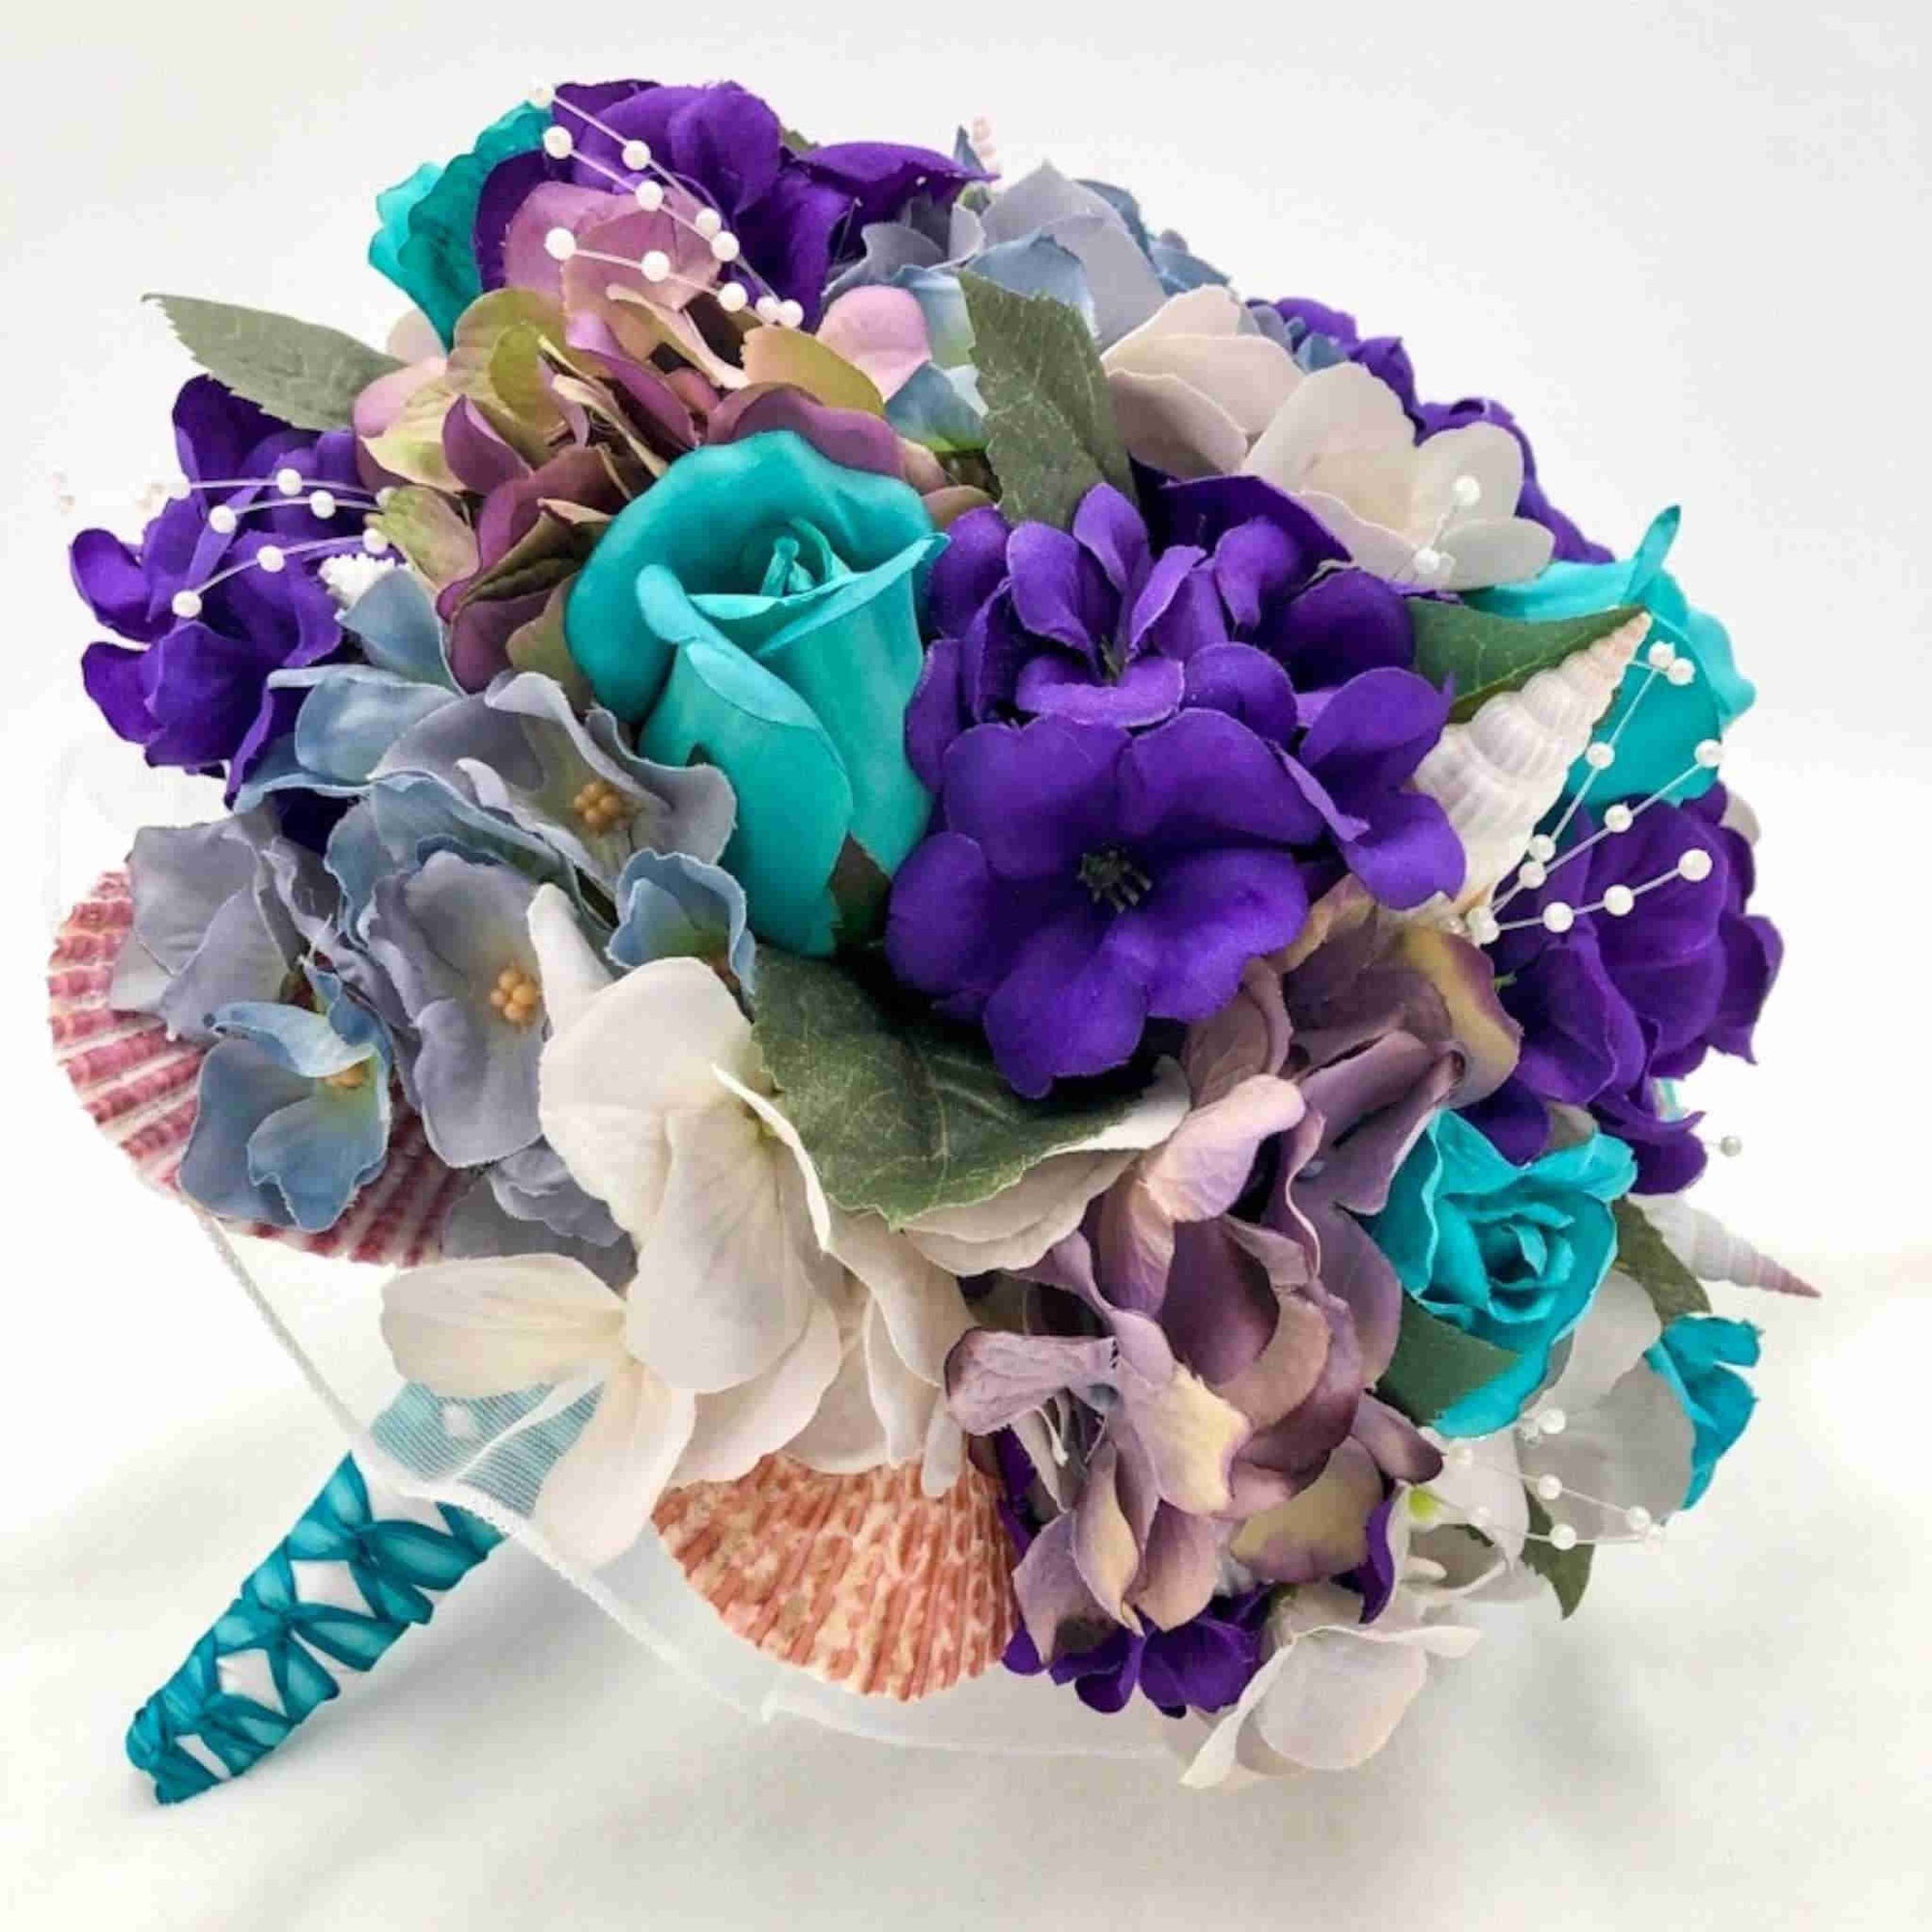 Made with purple and turquoise flowers, accented with seashells and white pearl stems, this beautiful bouquet sits atop a handle with a comfort grip wrapped in white satin with teal accent ribbon.